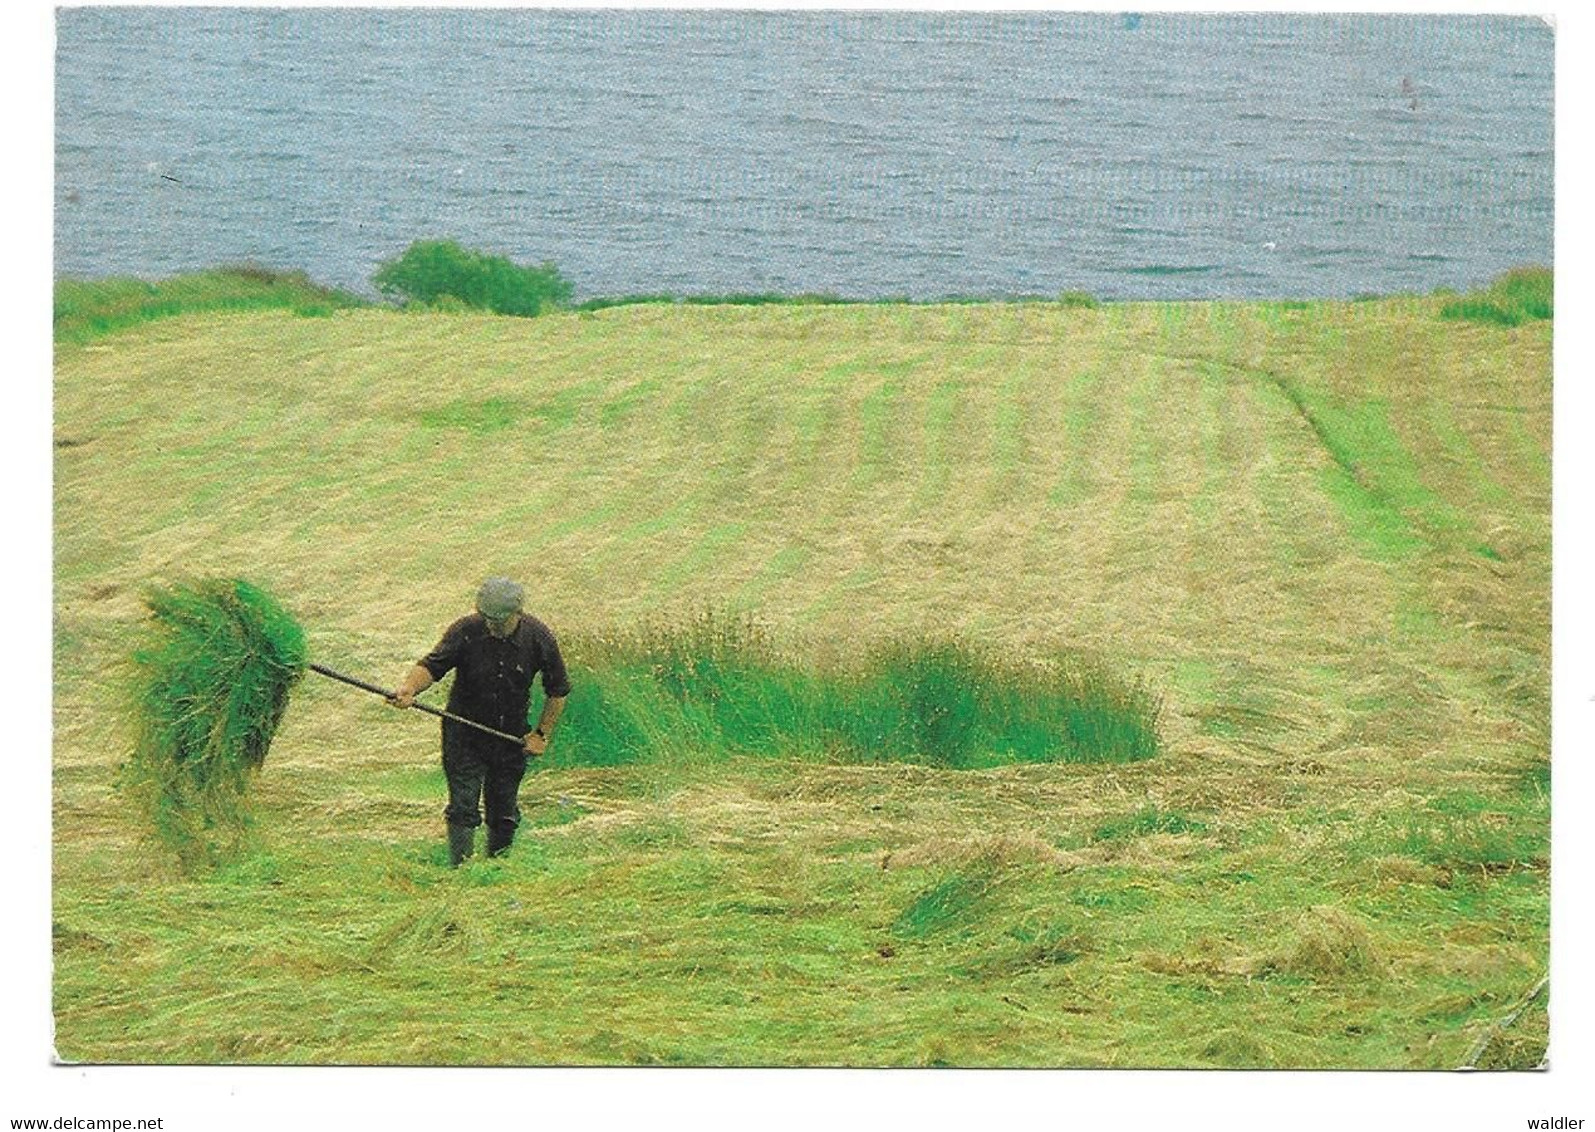 SHAKING THE HAY ON THE COAST NEAR KILLYBEGS - Donegal